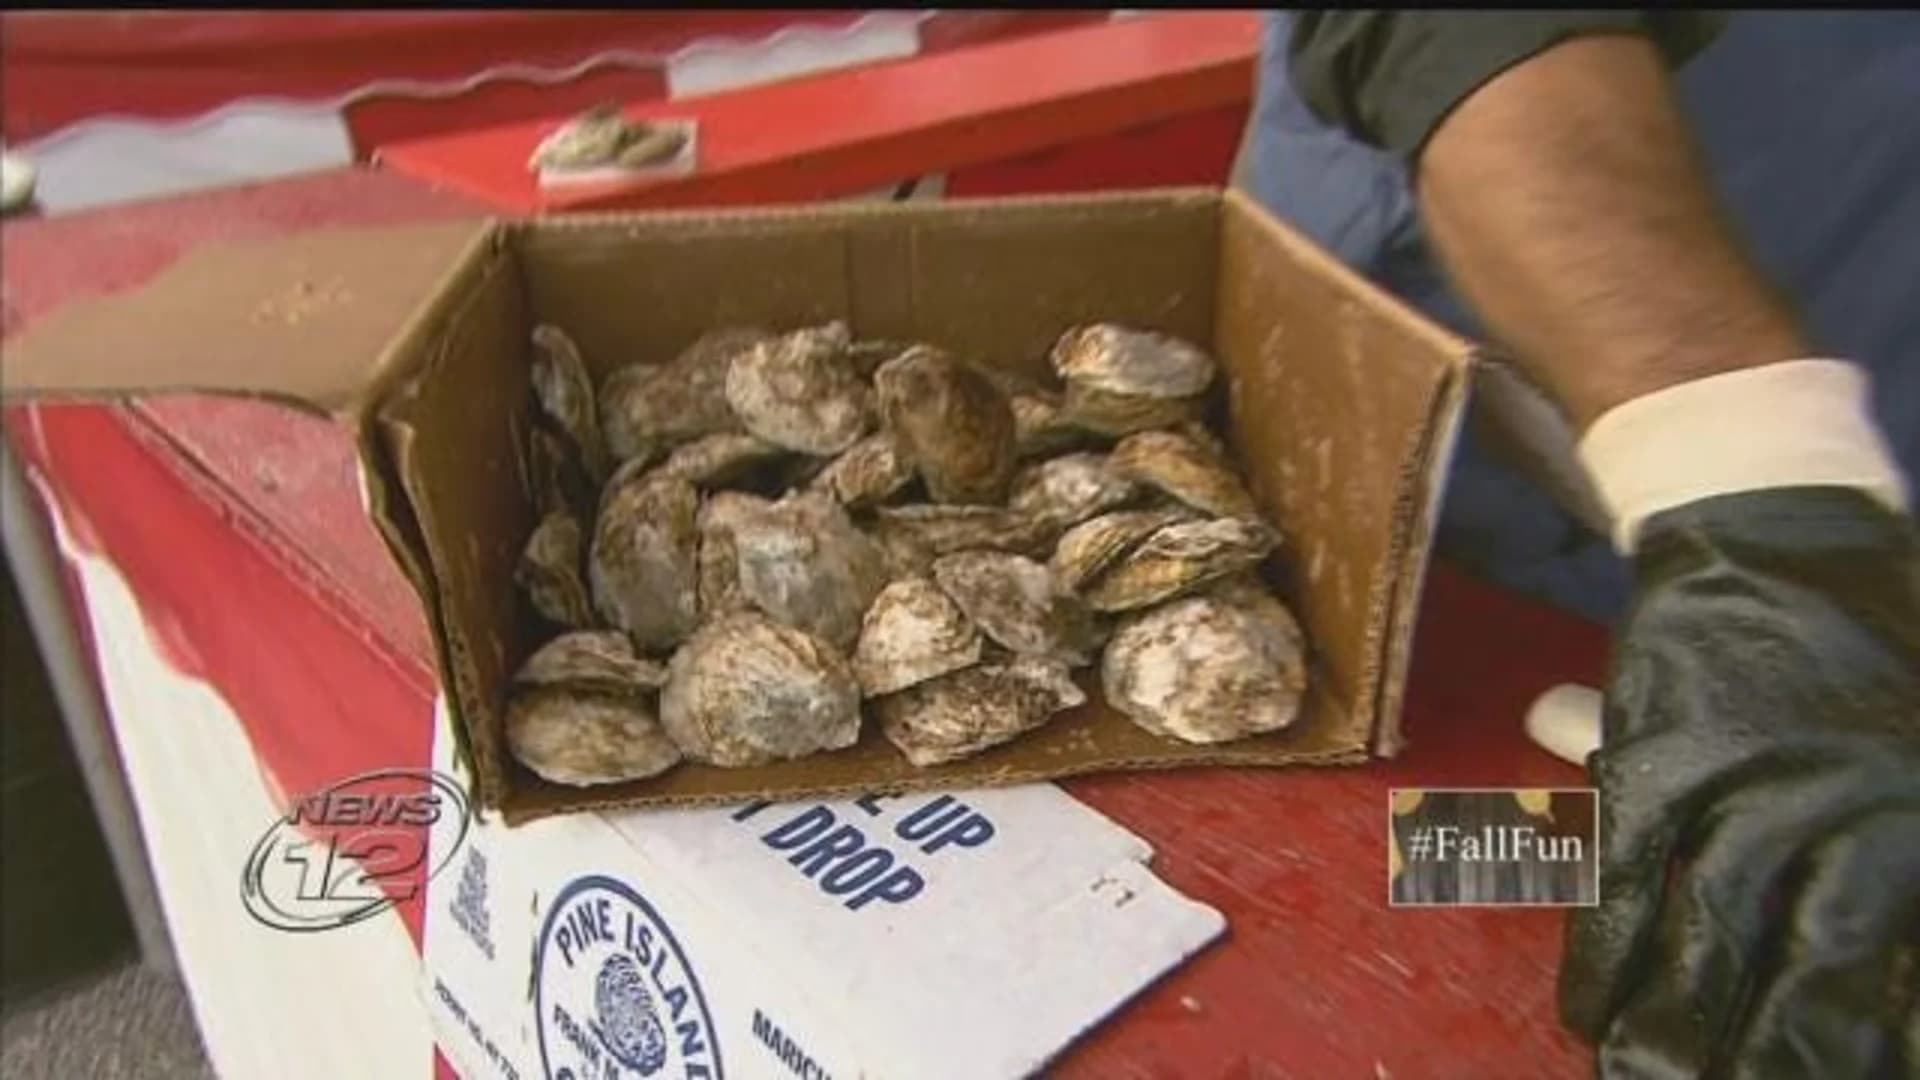 34th annual Oyster Festival kicks off this weekend